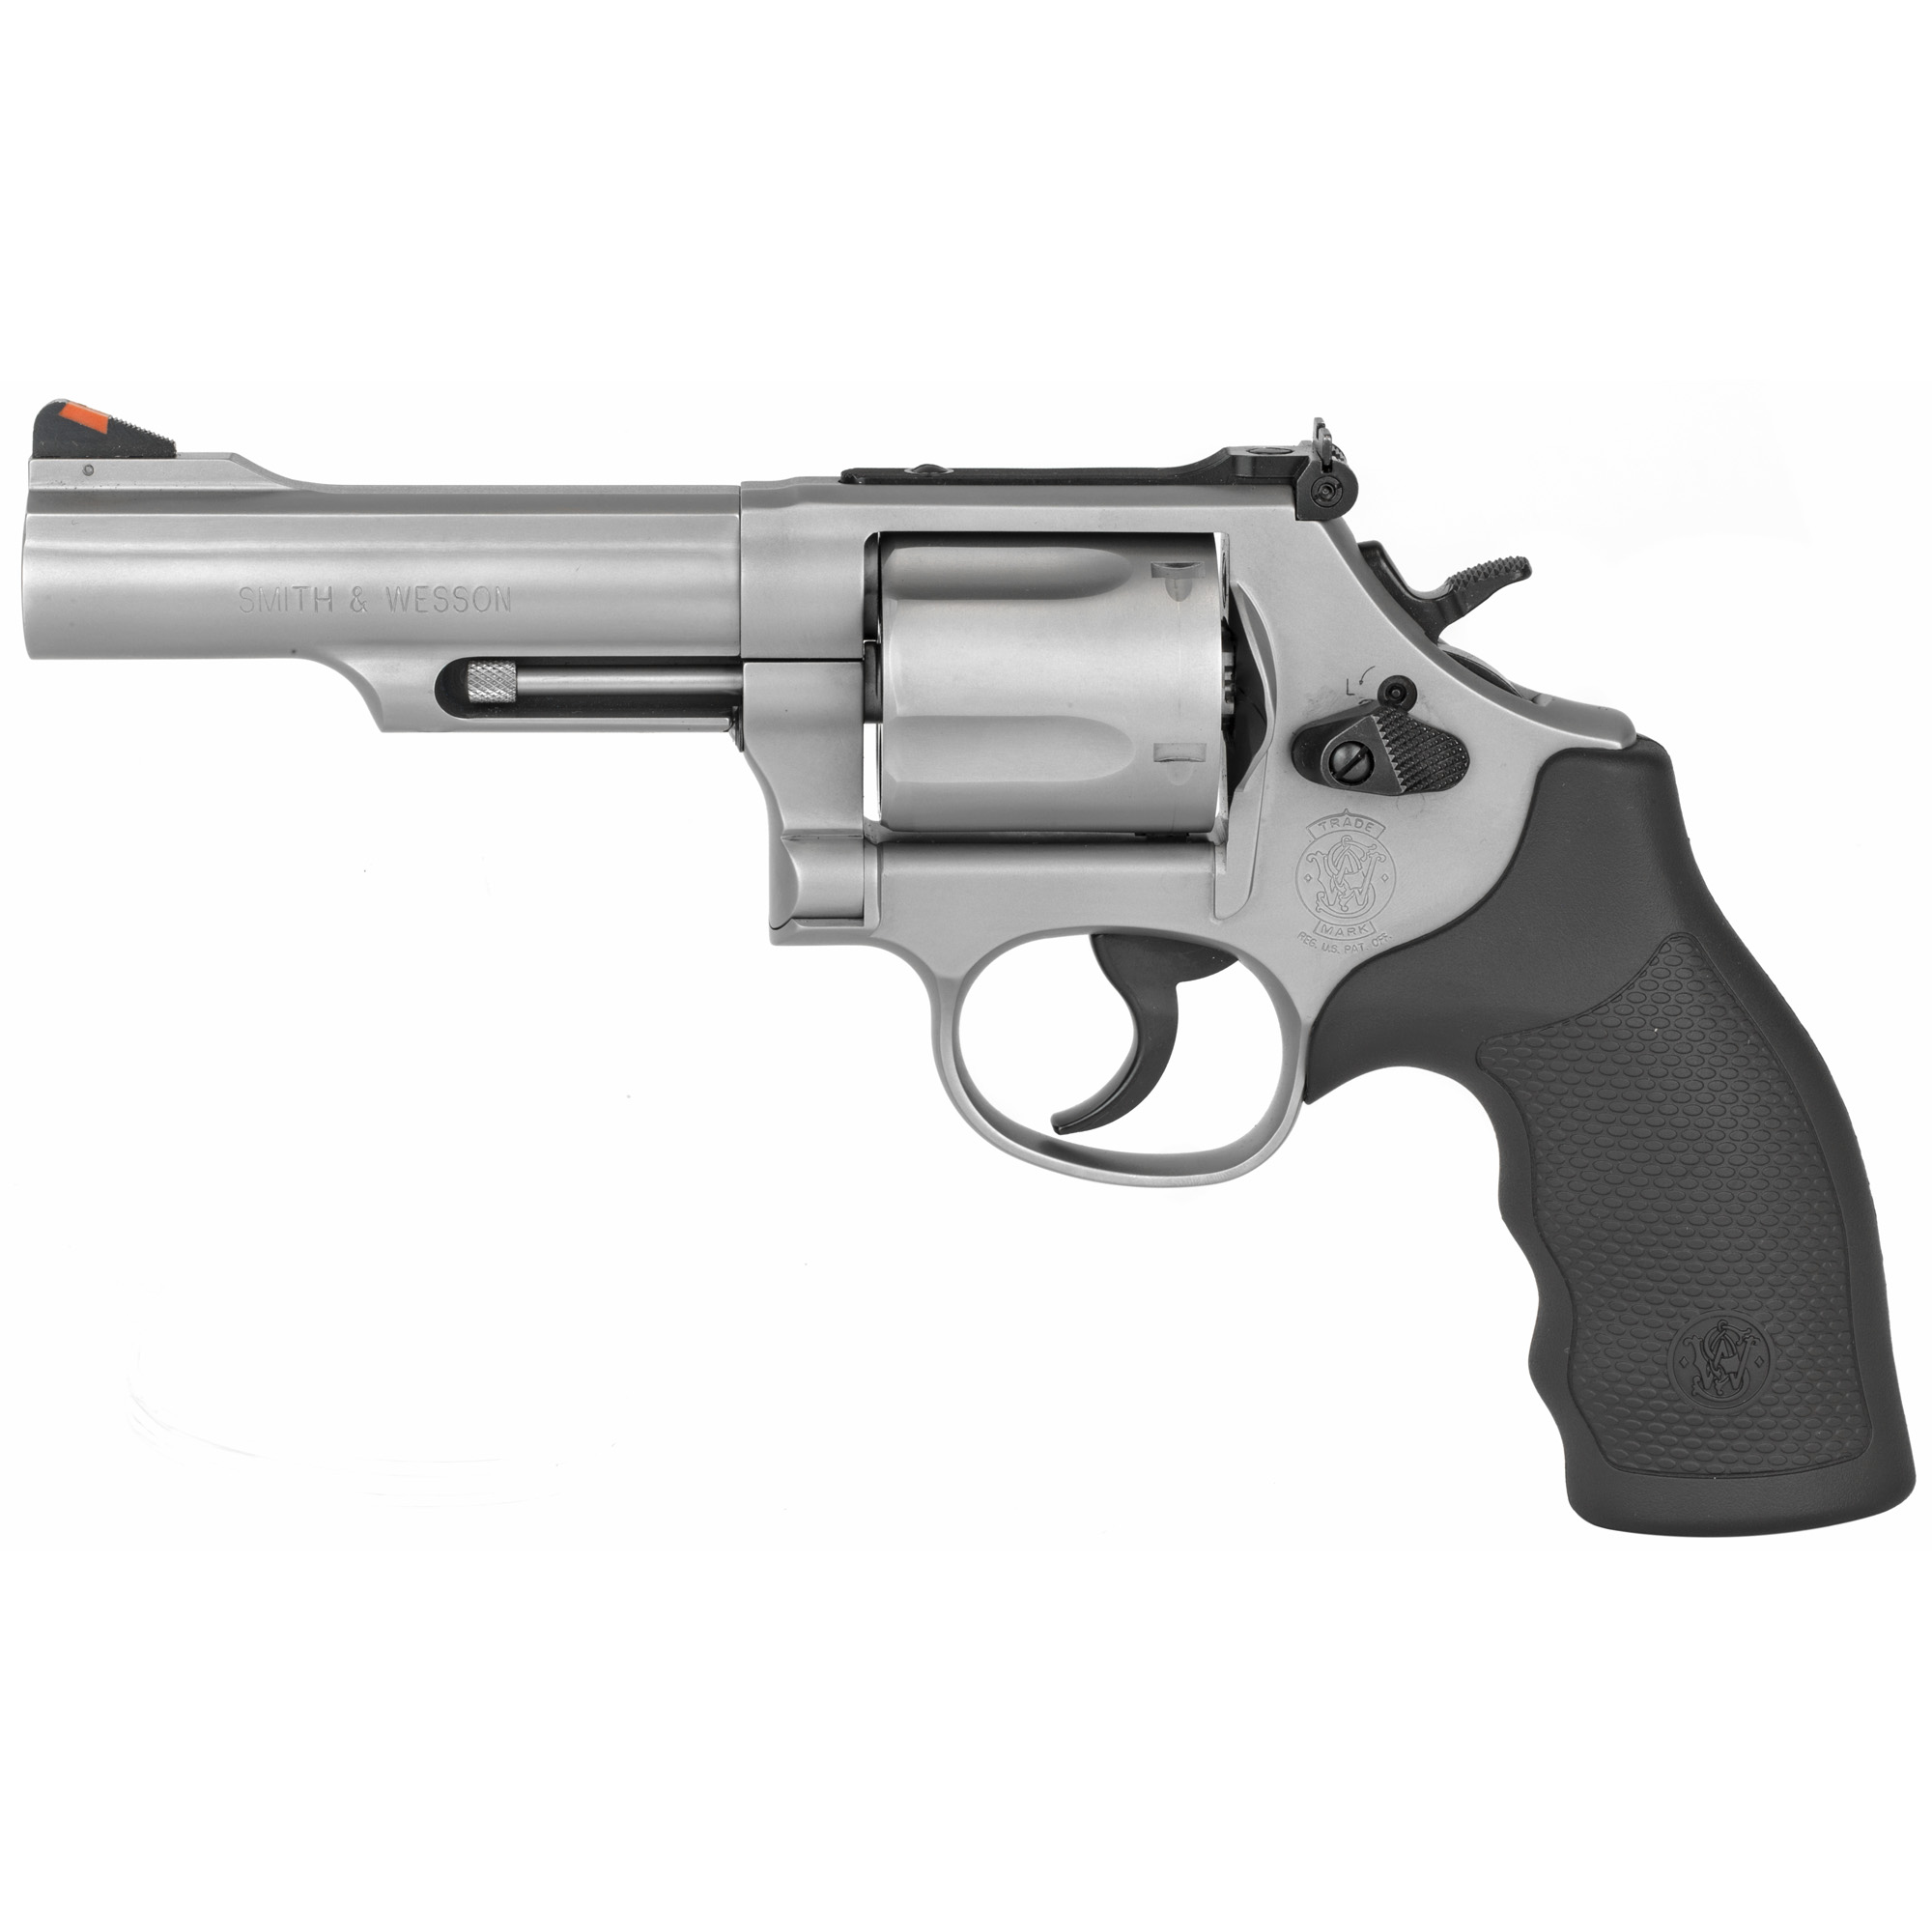 S&W 69 44MAG 4.25 5RD STS AS RBR